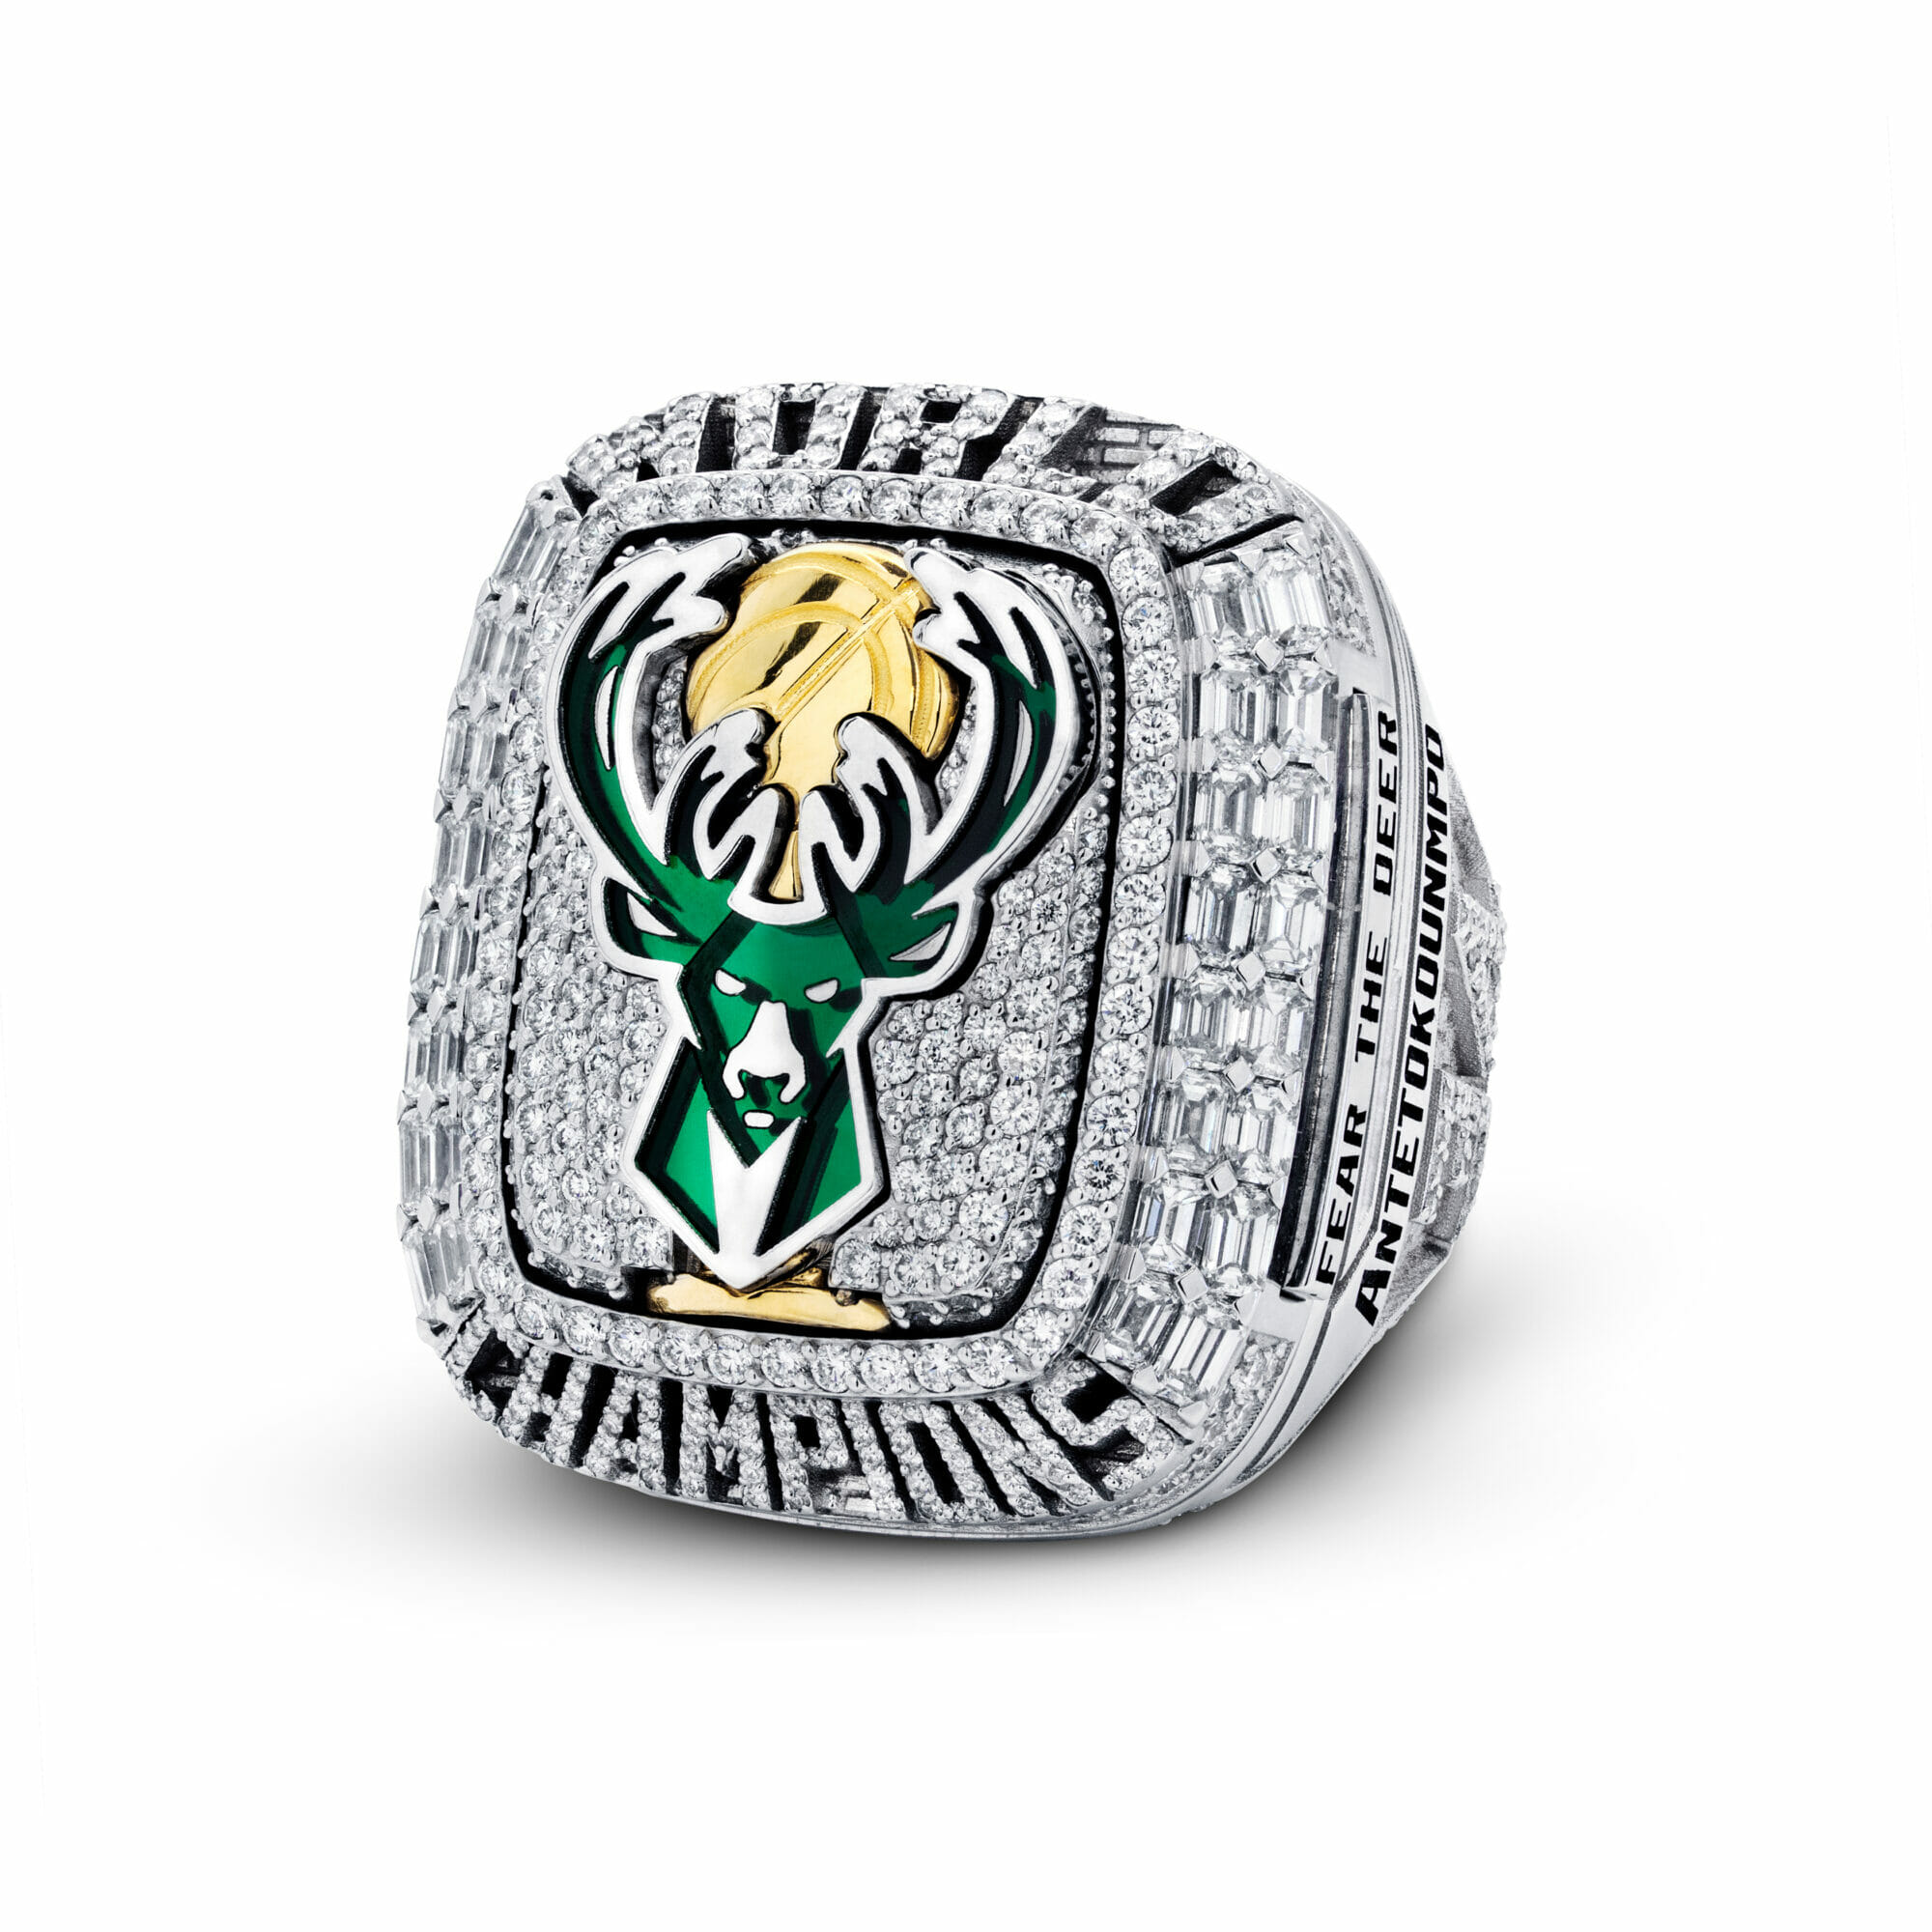 Check out NBA championship rings through the years